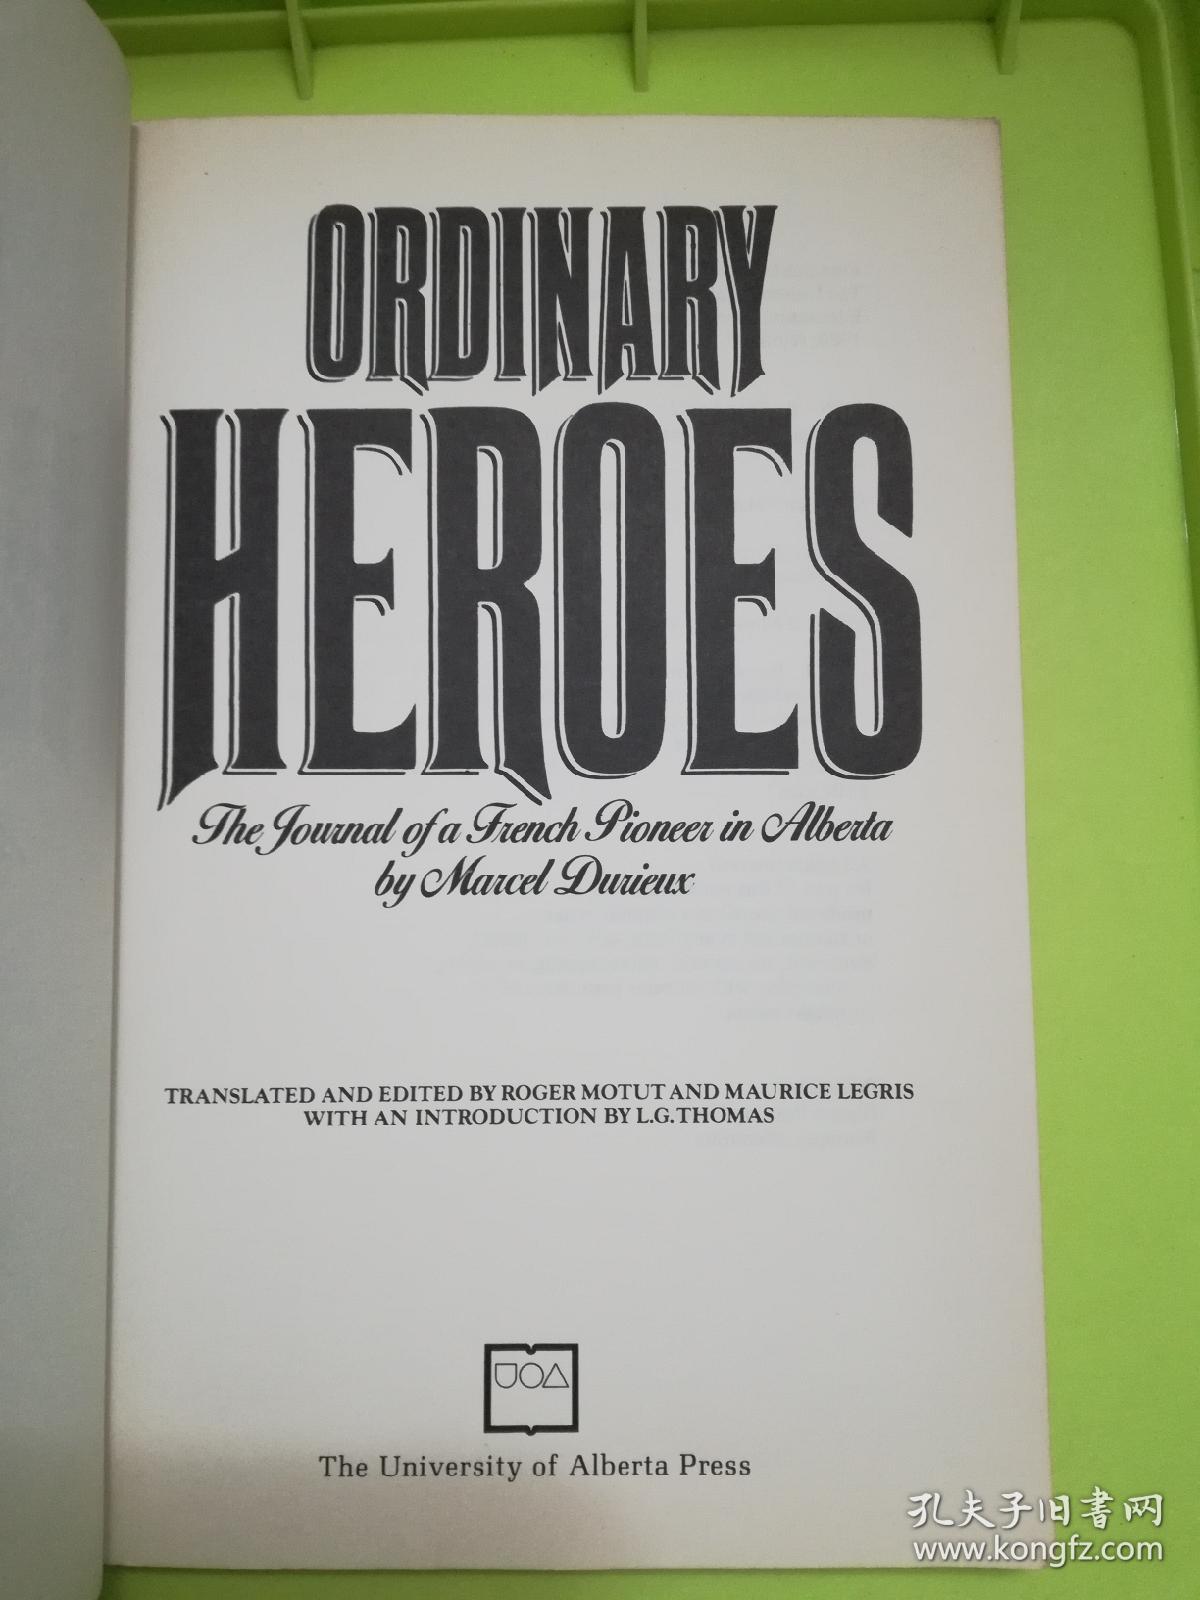 Ordinary Heroes: The Journal of a French Pioneer in Alberta by Marcel Duriex(签赠本，保真)